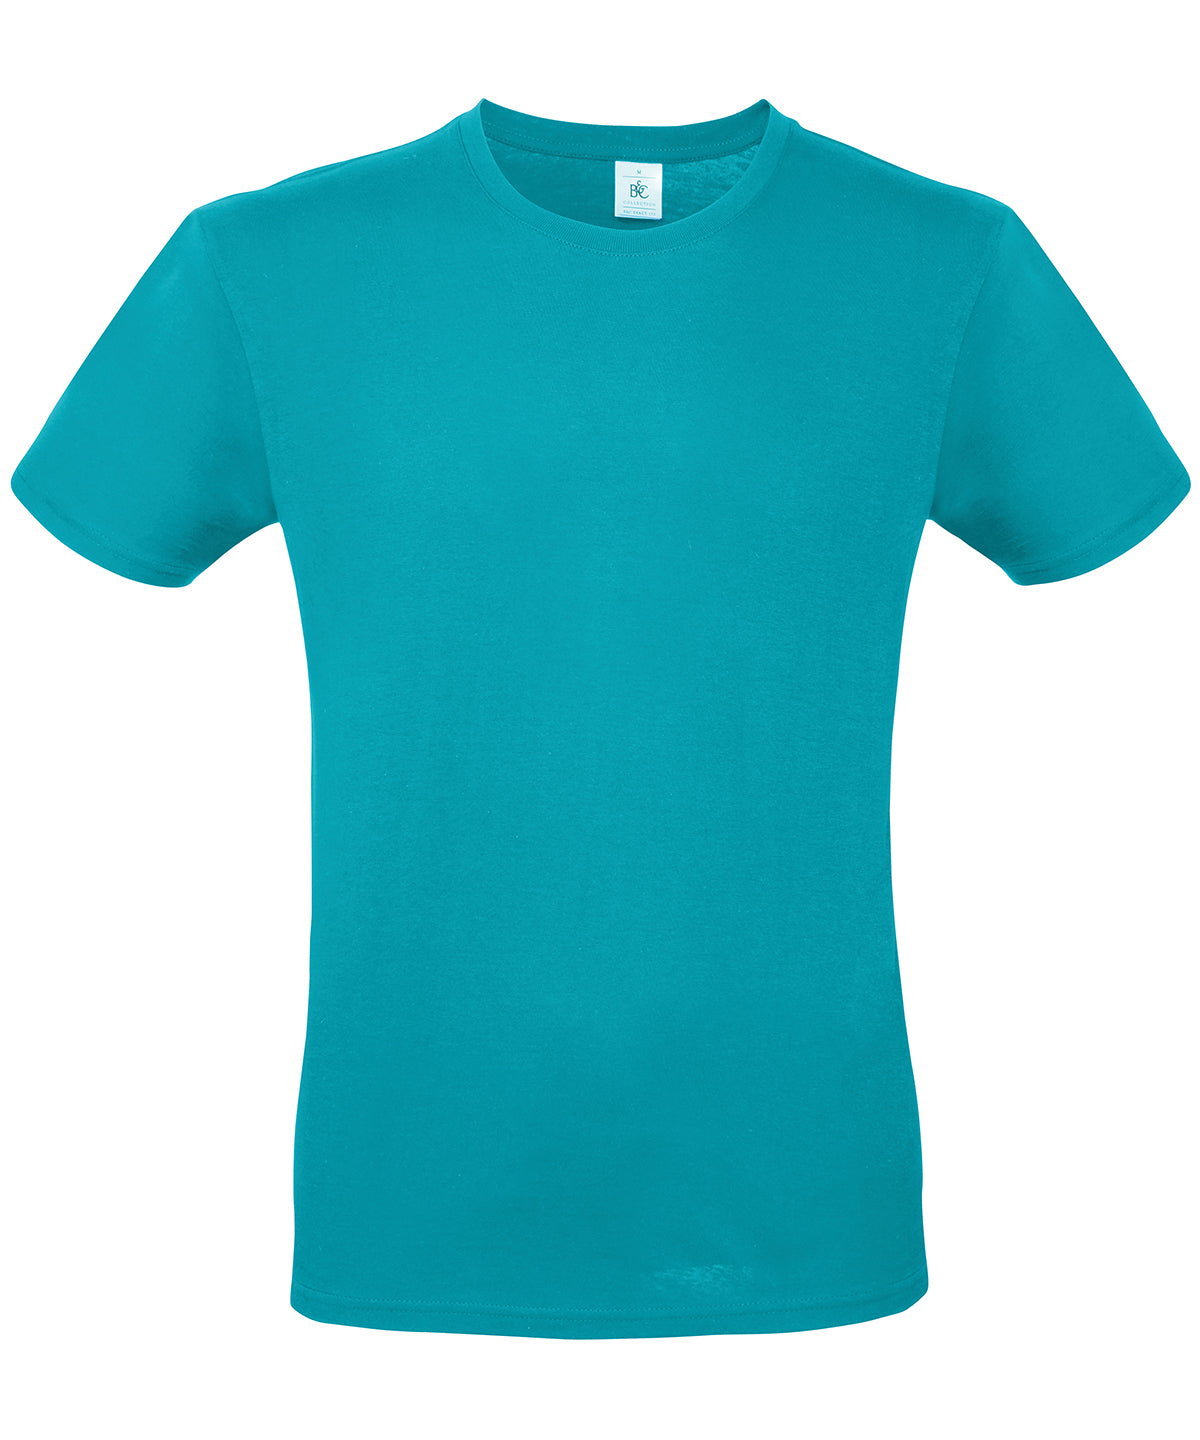 Personalised T-Shirts - Mid Green B&C Collection B&C #E150